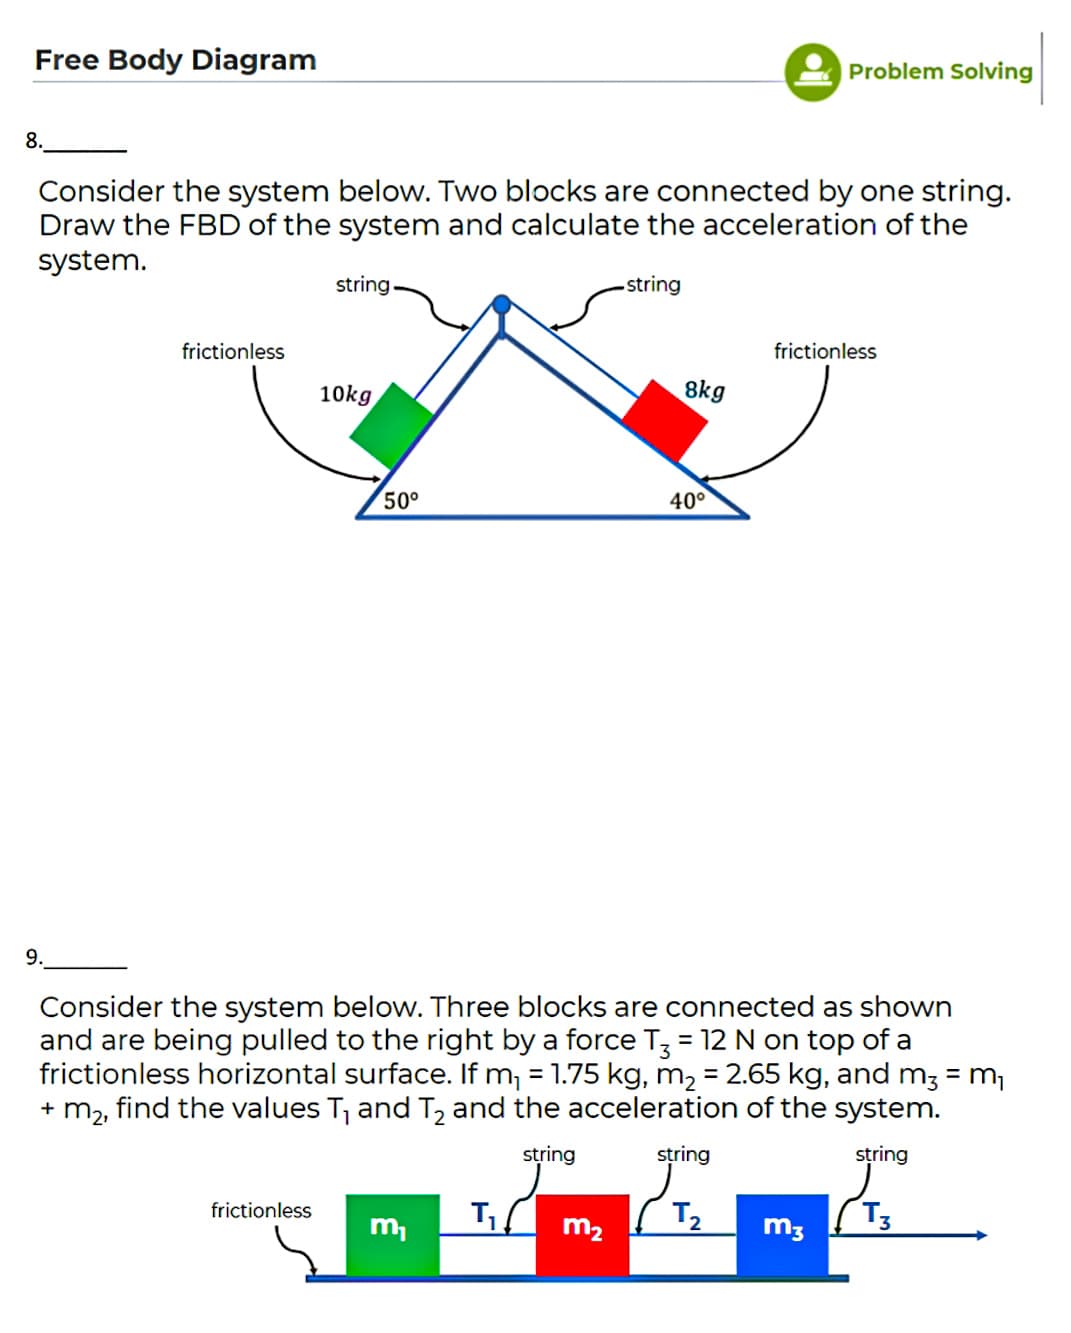 Free Body Diagram
Problem Solving
8.
Consider the system below. Two blocks are connected by one string.
Draw the FBD of the system and calculate the acceleration of the
system.
string
-string
frictionless
frictionless
10kg
8kg
50°
40°
9.
Consider the system below. Three blocks are connected as shown
and are being pulled to the right by a force T; = 12 N on top of a
frictionless horizontal surface. If m, = 1.75 kg, m2 = 2.65 kg, and m3 = m,
+ m2, find the values T, and T and the acceleration of the system.
string
string
string
frictionless
T2
m,
m2
m3
